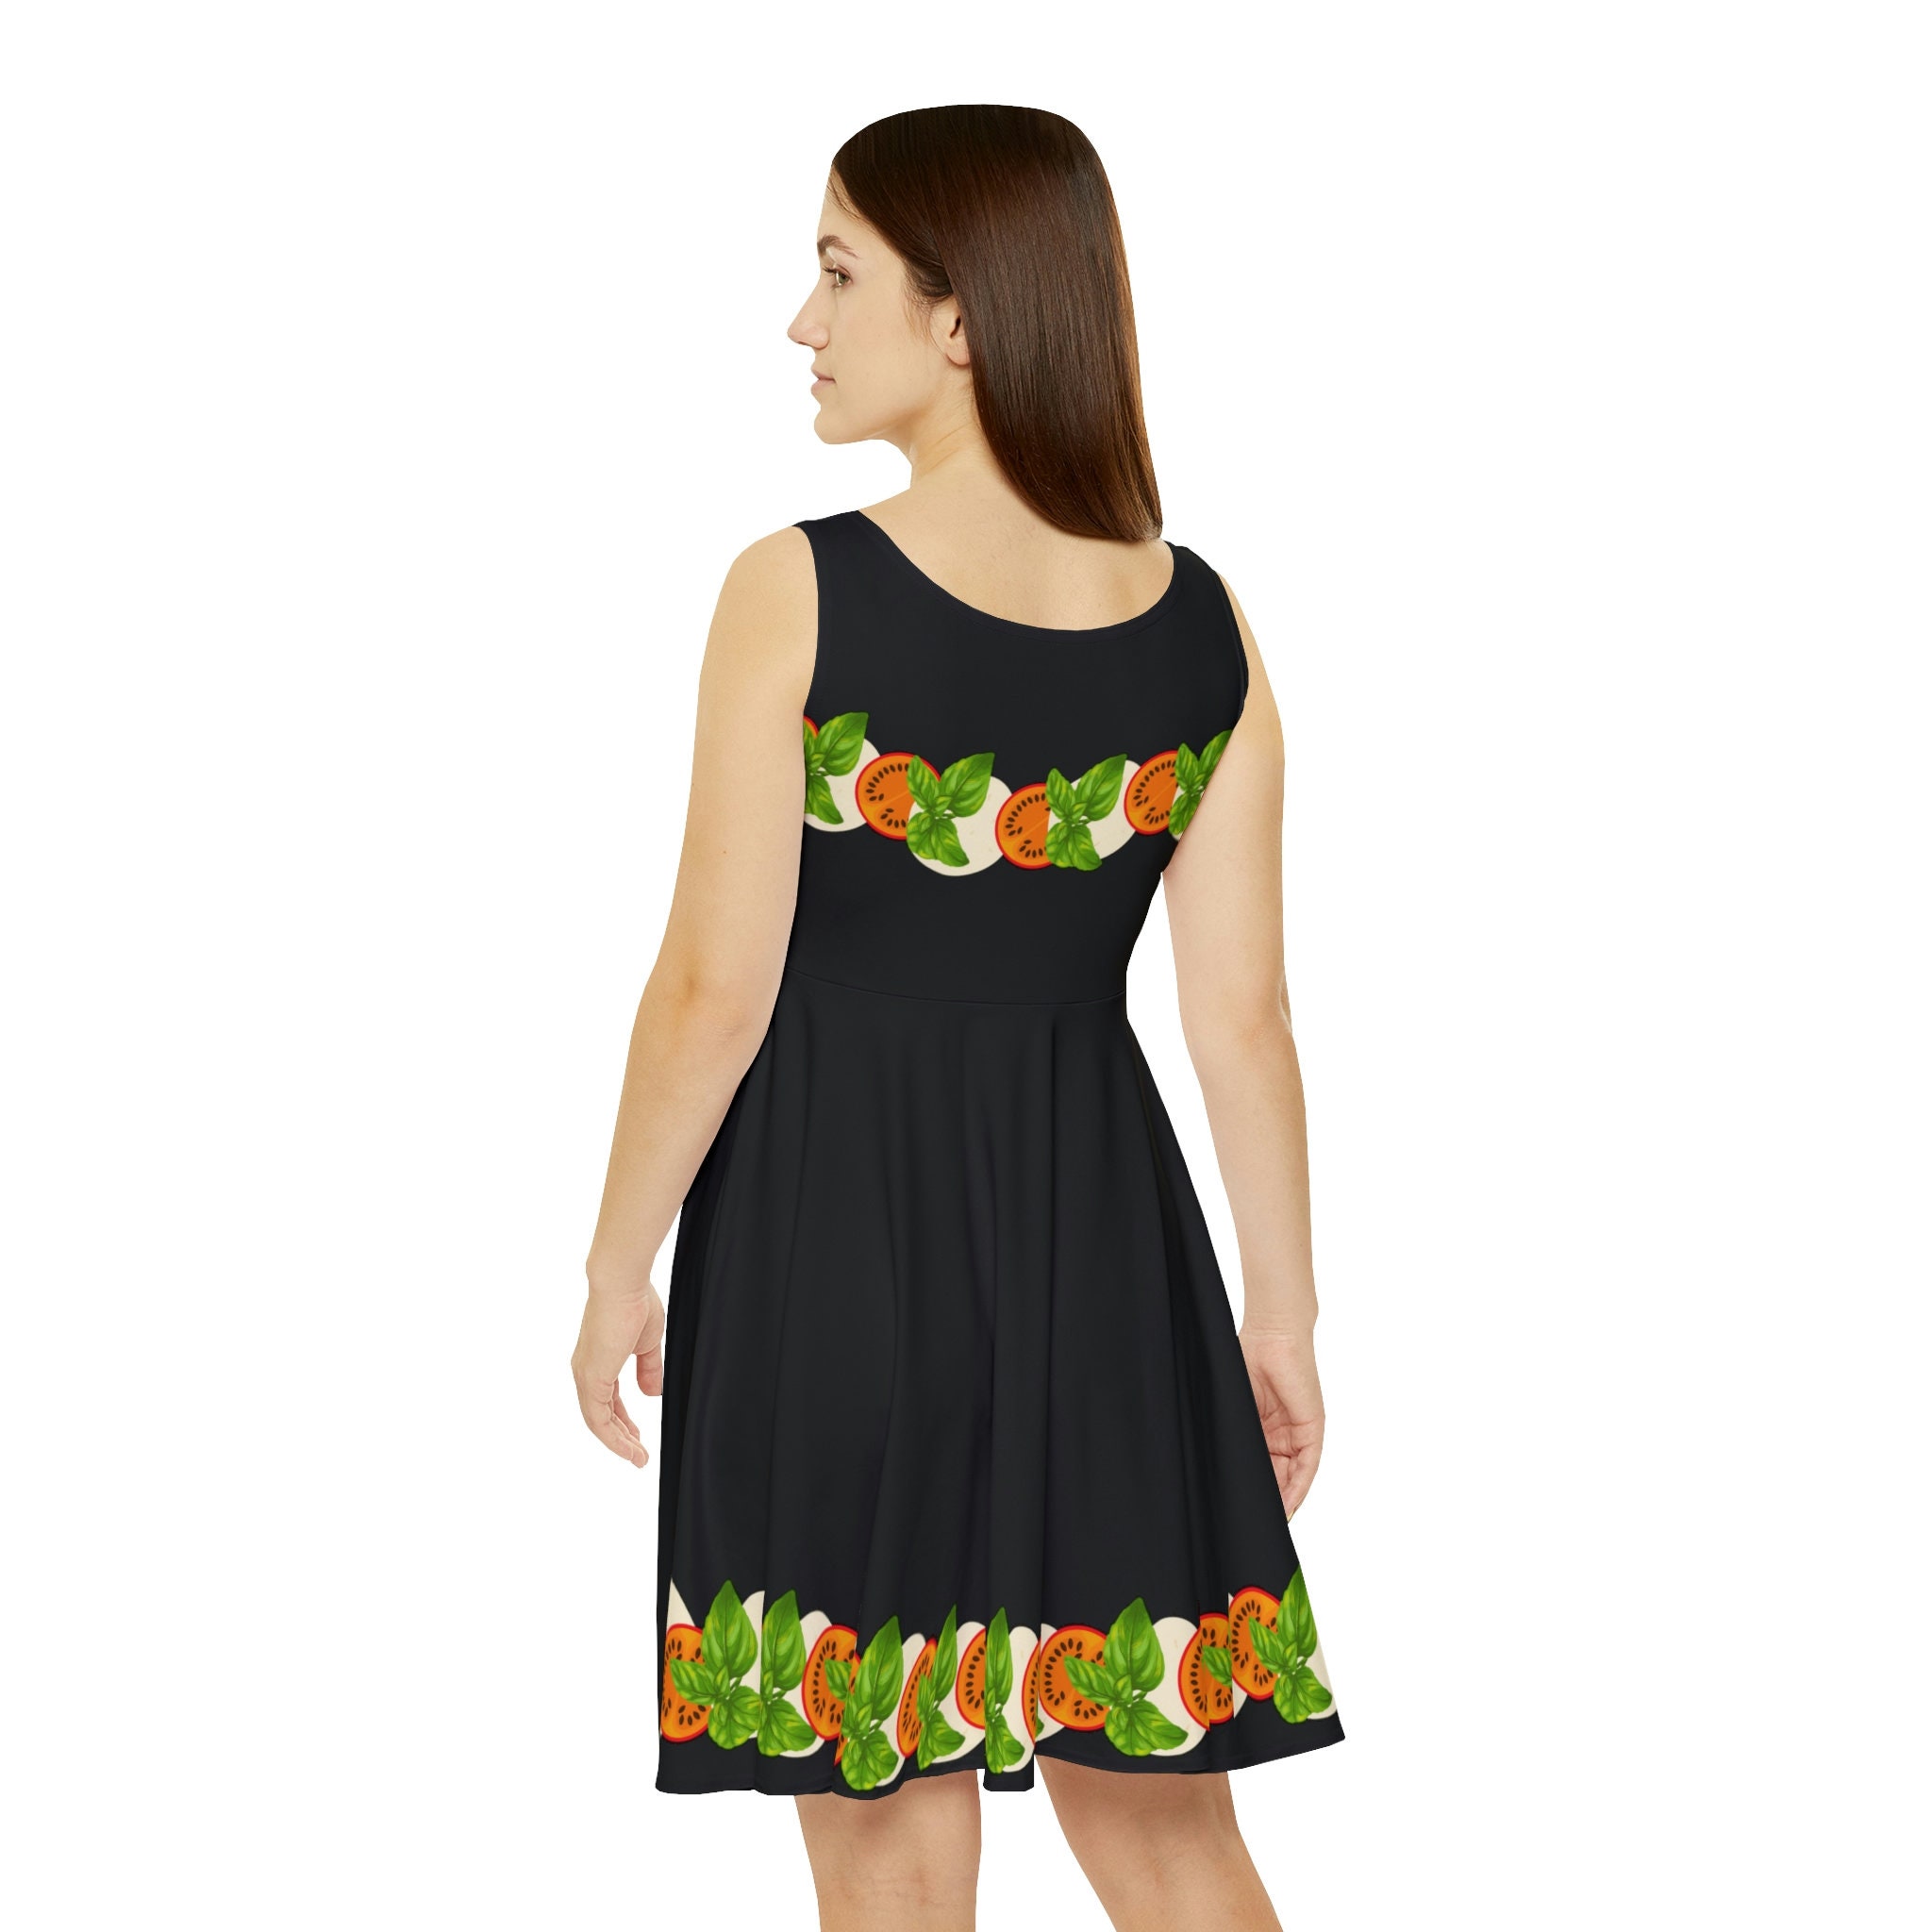 Food Inspired Clothing: Tasty Italian Caprese Salad Dress L Fun and Flirty  Summer Outfit L Perfect for Foodies. 